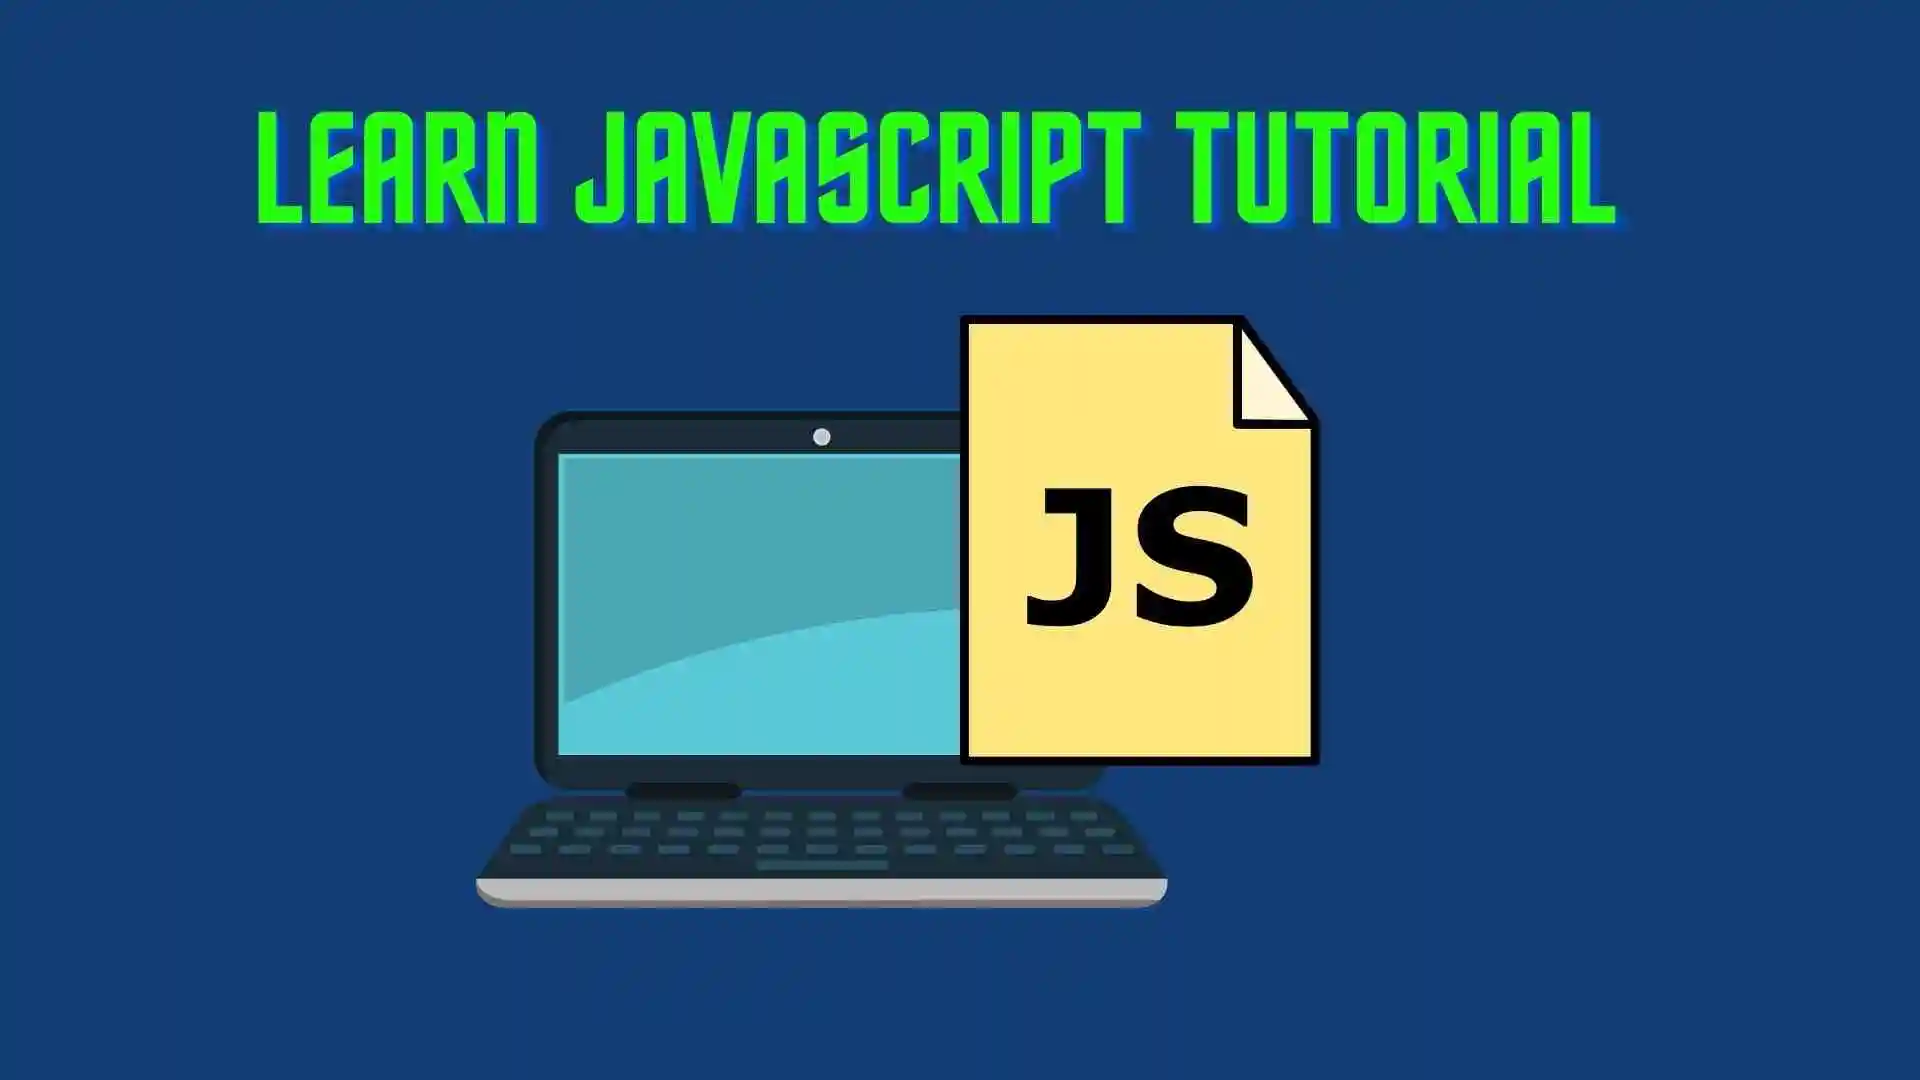 Javascript is the most popular programming languages in the world, with a wide range of uses across different industries and applications.